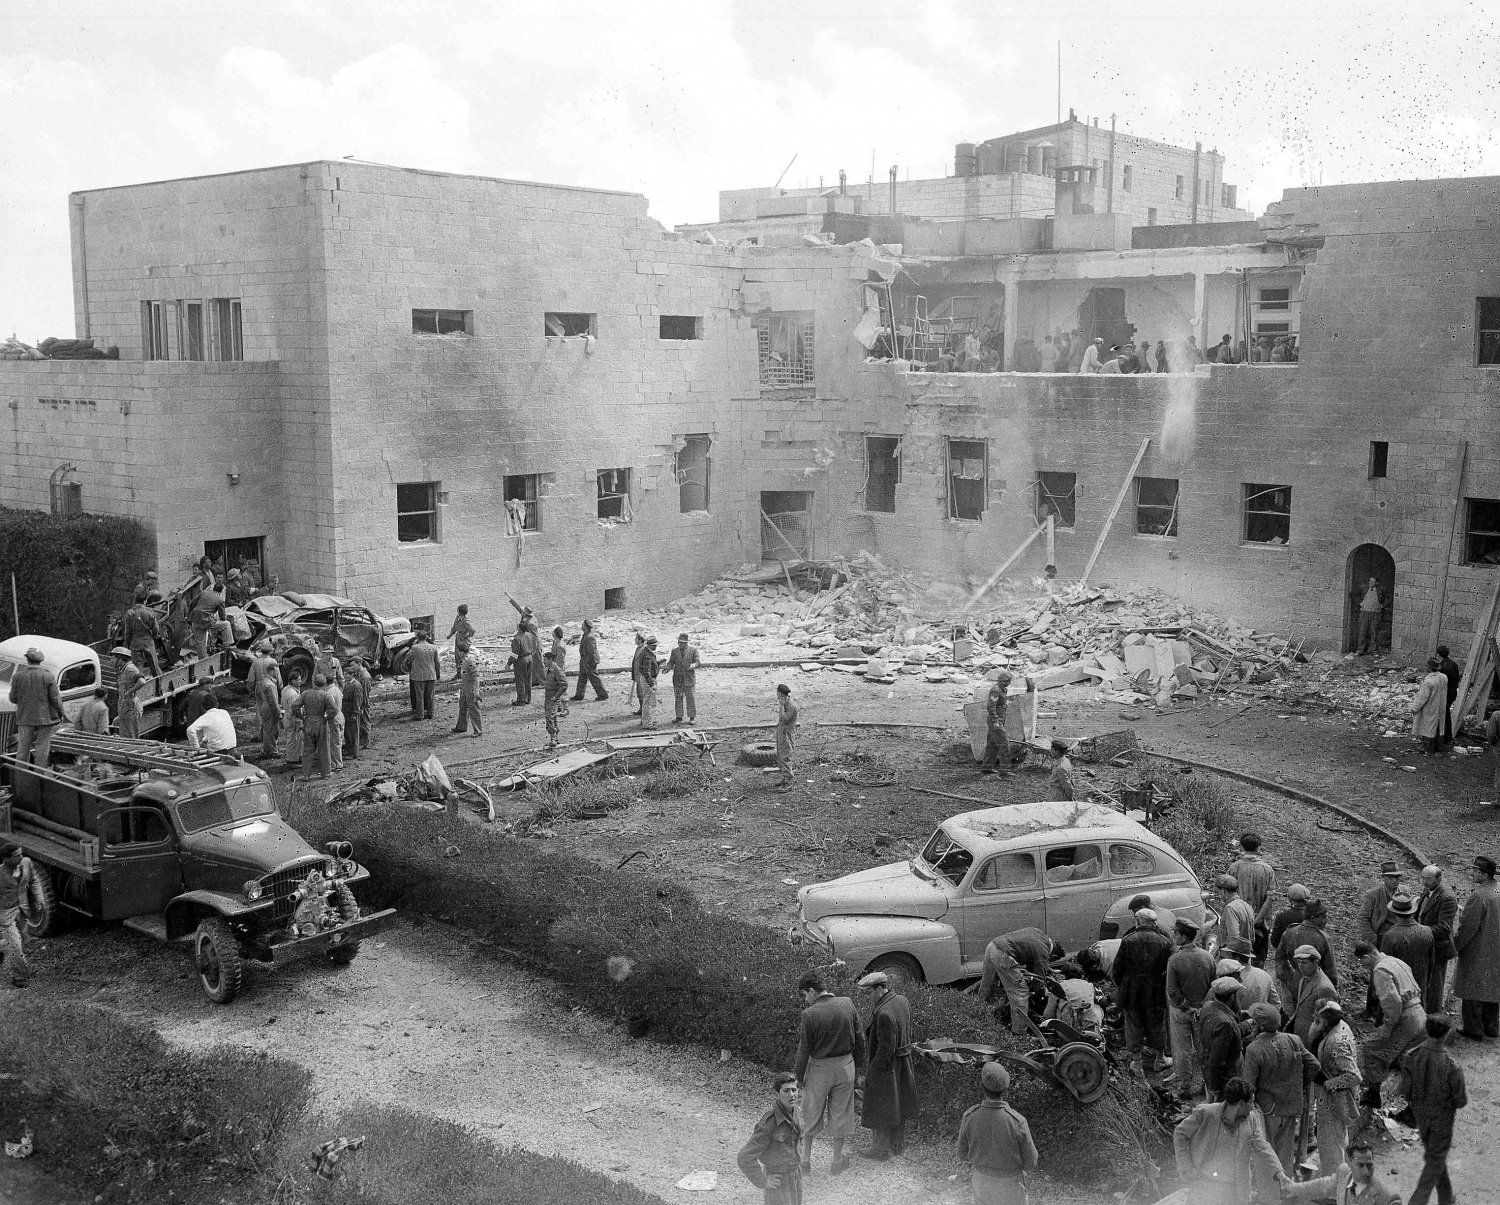 Car bombing of the Jewish Agency in Jerusalem on March 11, 1948